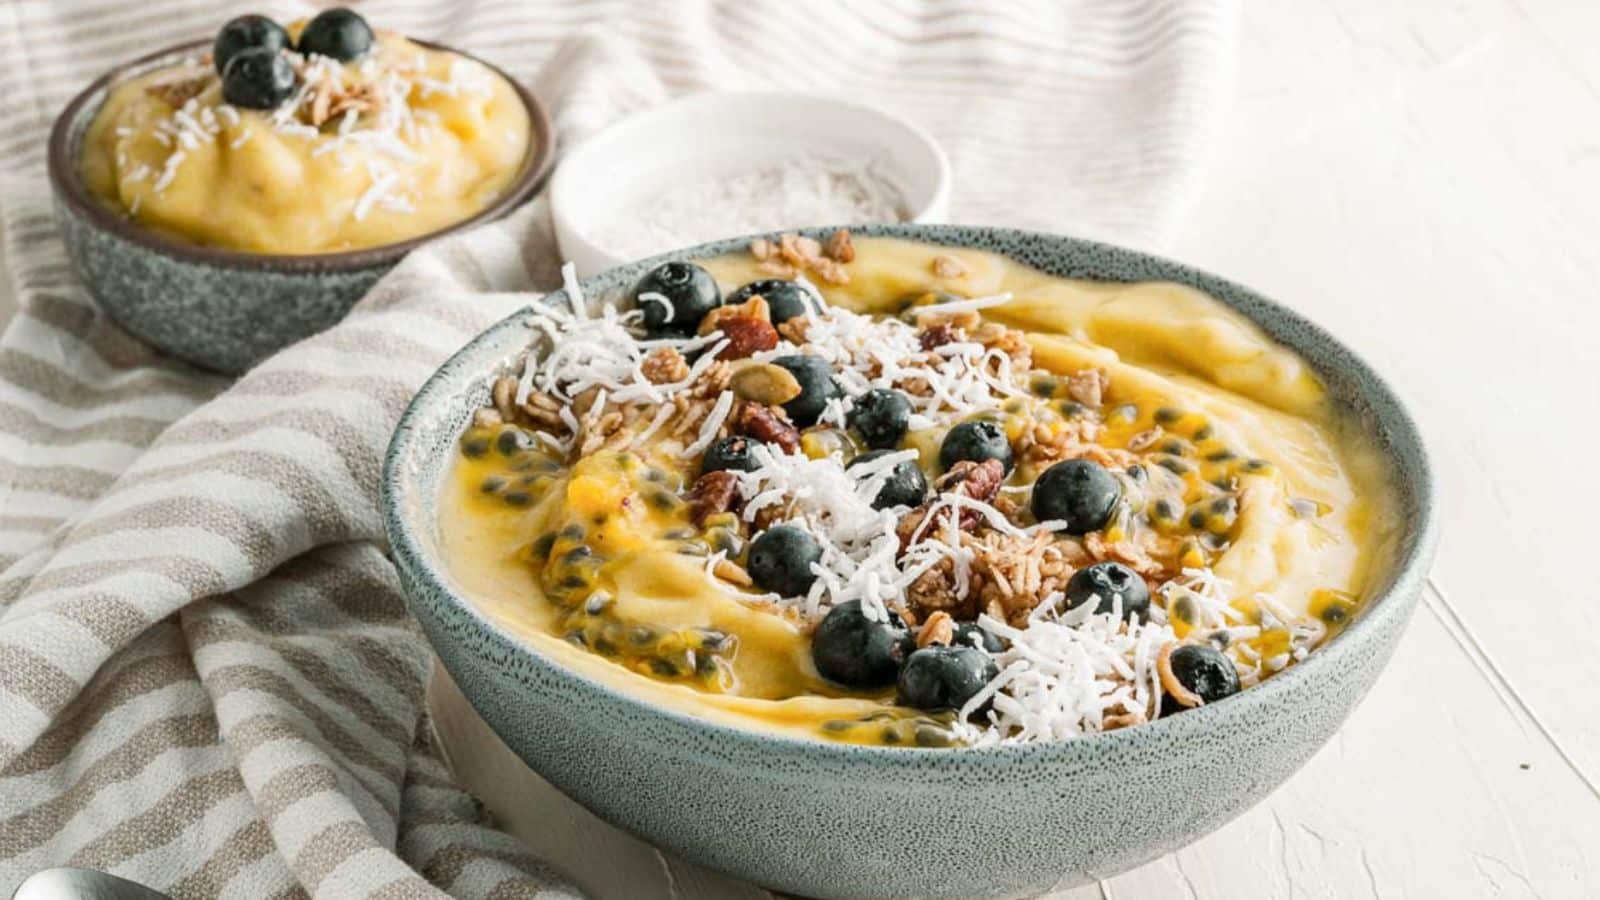 <p>Brighten up your morning with a mango banana smoothie bowl. It’s a refreshing blend of fruits, topped with seeds and nuts for extra crunch and nutrition. This bowl is a feast for the eyes and fills you up with goodness. It’s the ideal quick fix for a busy morning.<br><strong>Get the Recipe: </strong><a href="https://twocityvegans.com/mango-banana-smoothie-bowl/?utm_source=msn&utm_medium=page&utm_campaign=msn" rel="noopener">Mango Banana Smoothie Bowl</a></p>